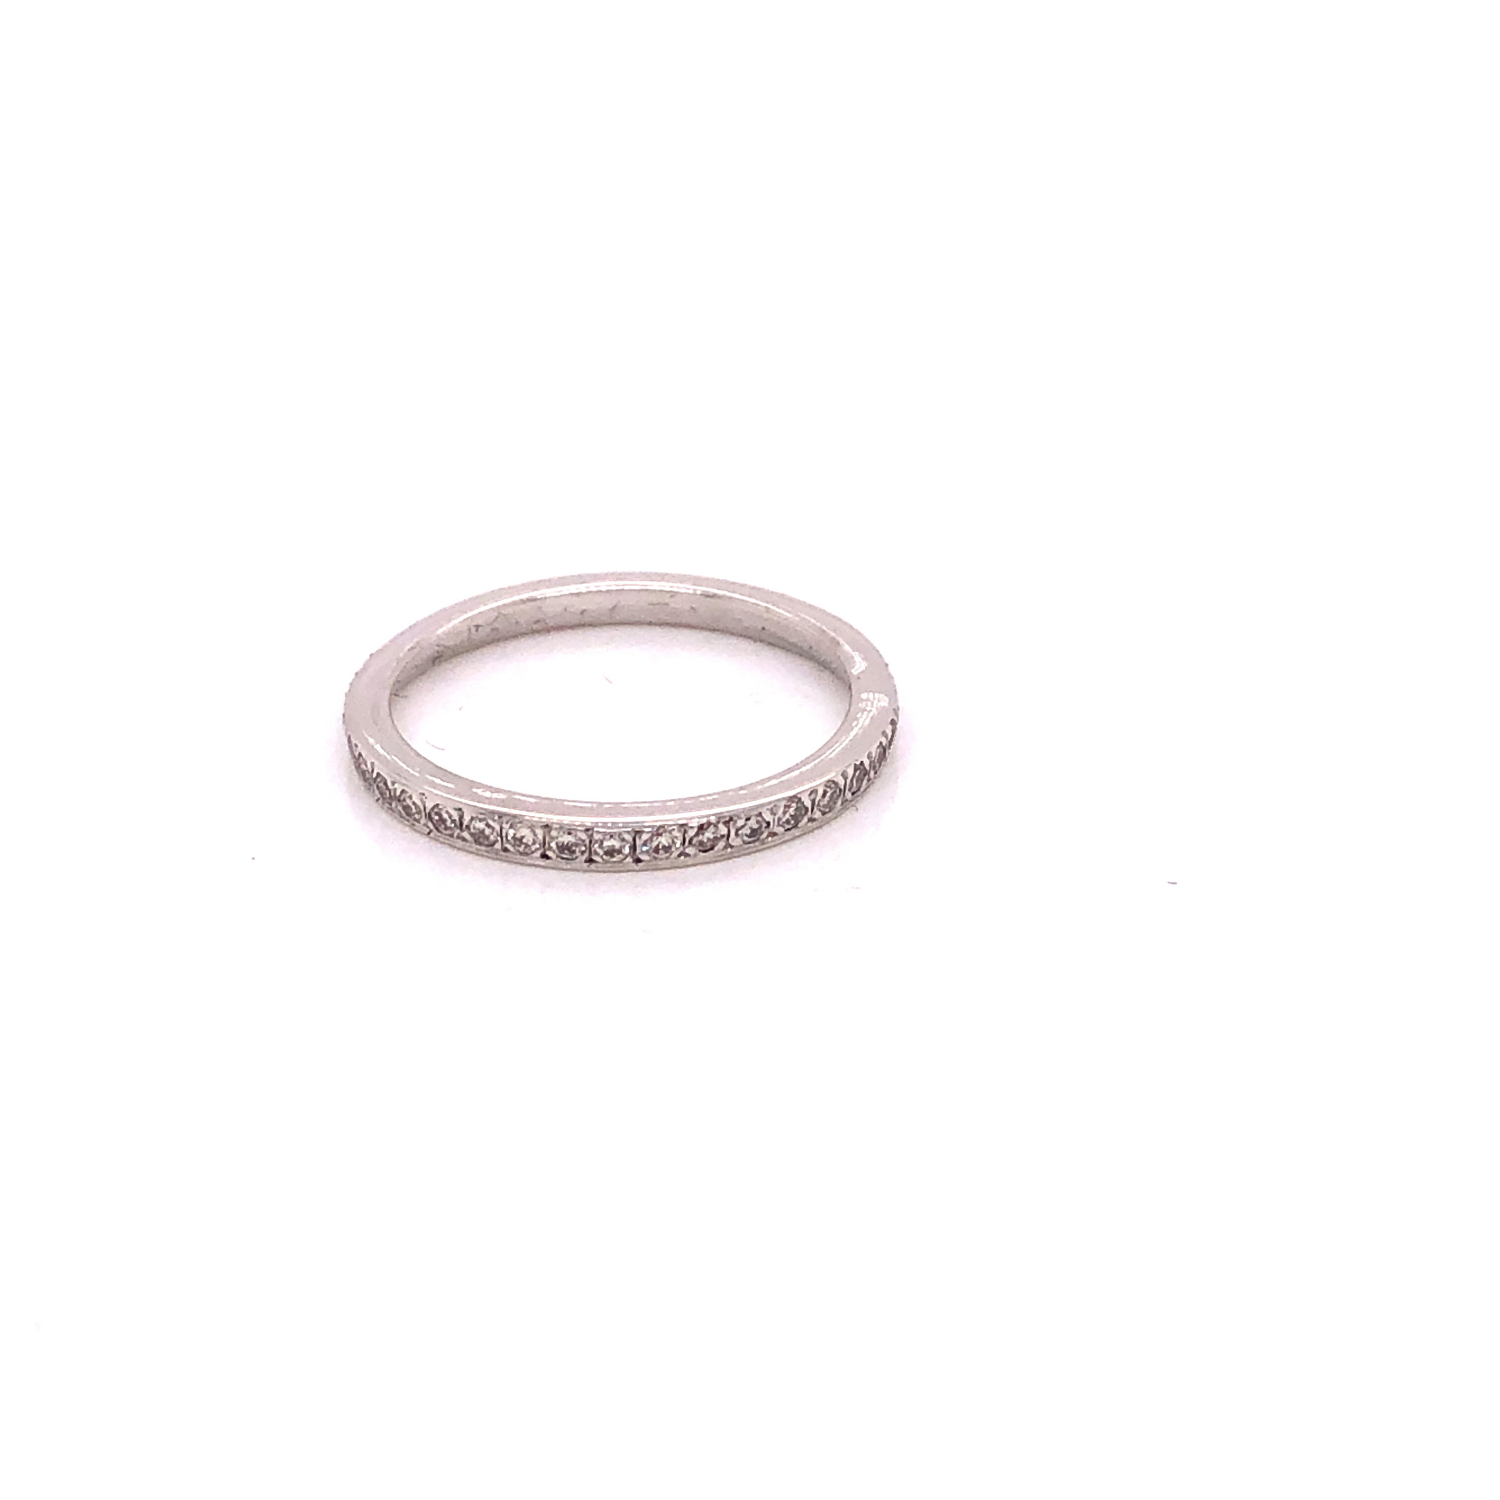 A 14ct WHITE GOLD TWO ROW DIAMOND SET HALF ETERNITY RING. FINGER SIZE M 1/2, GROSS WEIGHT 2.2grms. - Image 3 of 5